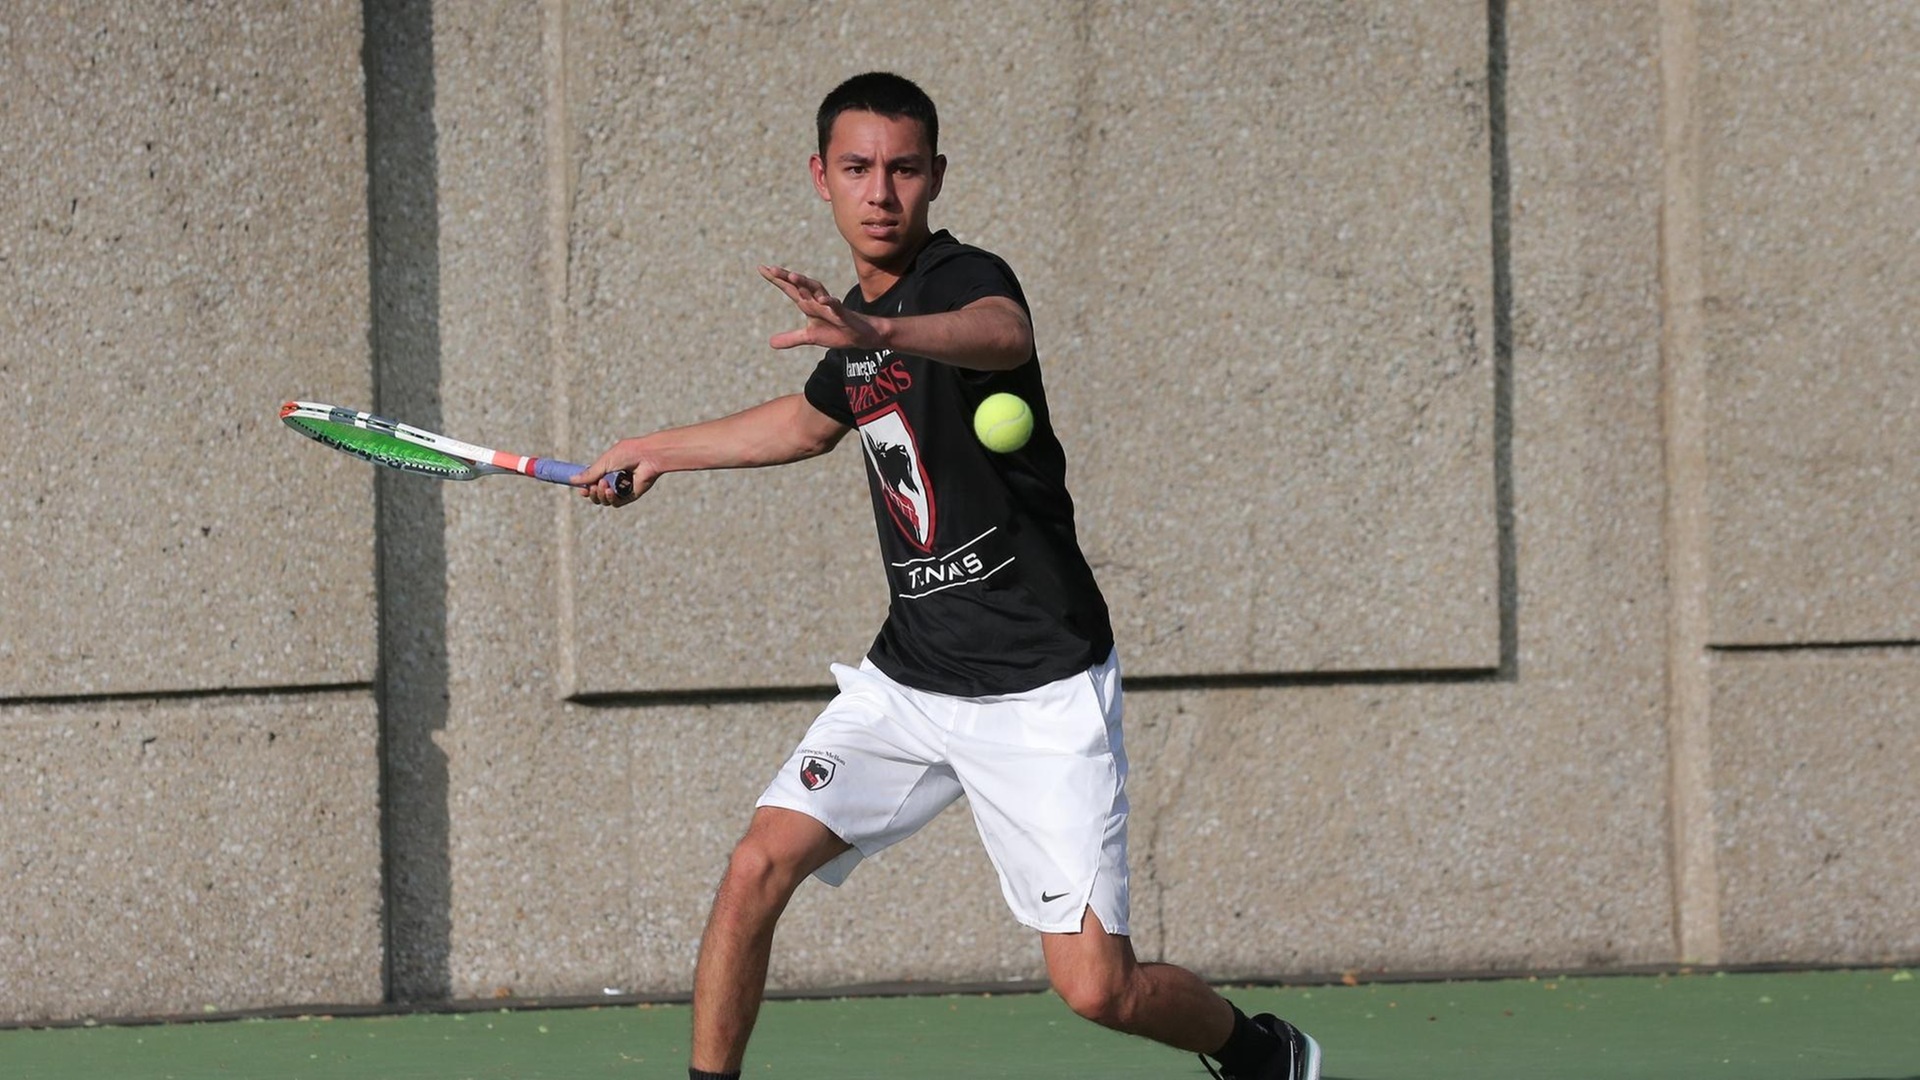 men's tennis player wearing a black shirt and white shorts swings racquet at ball